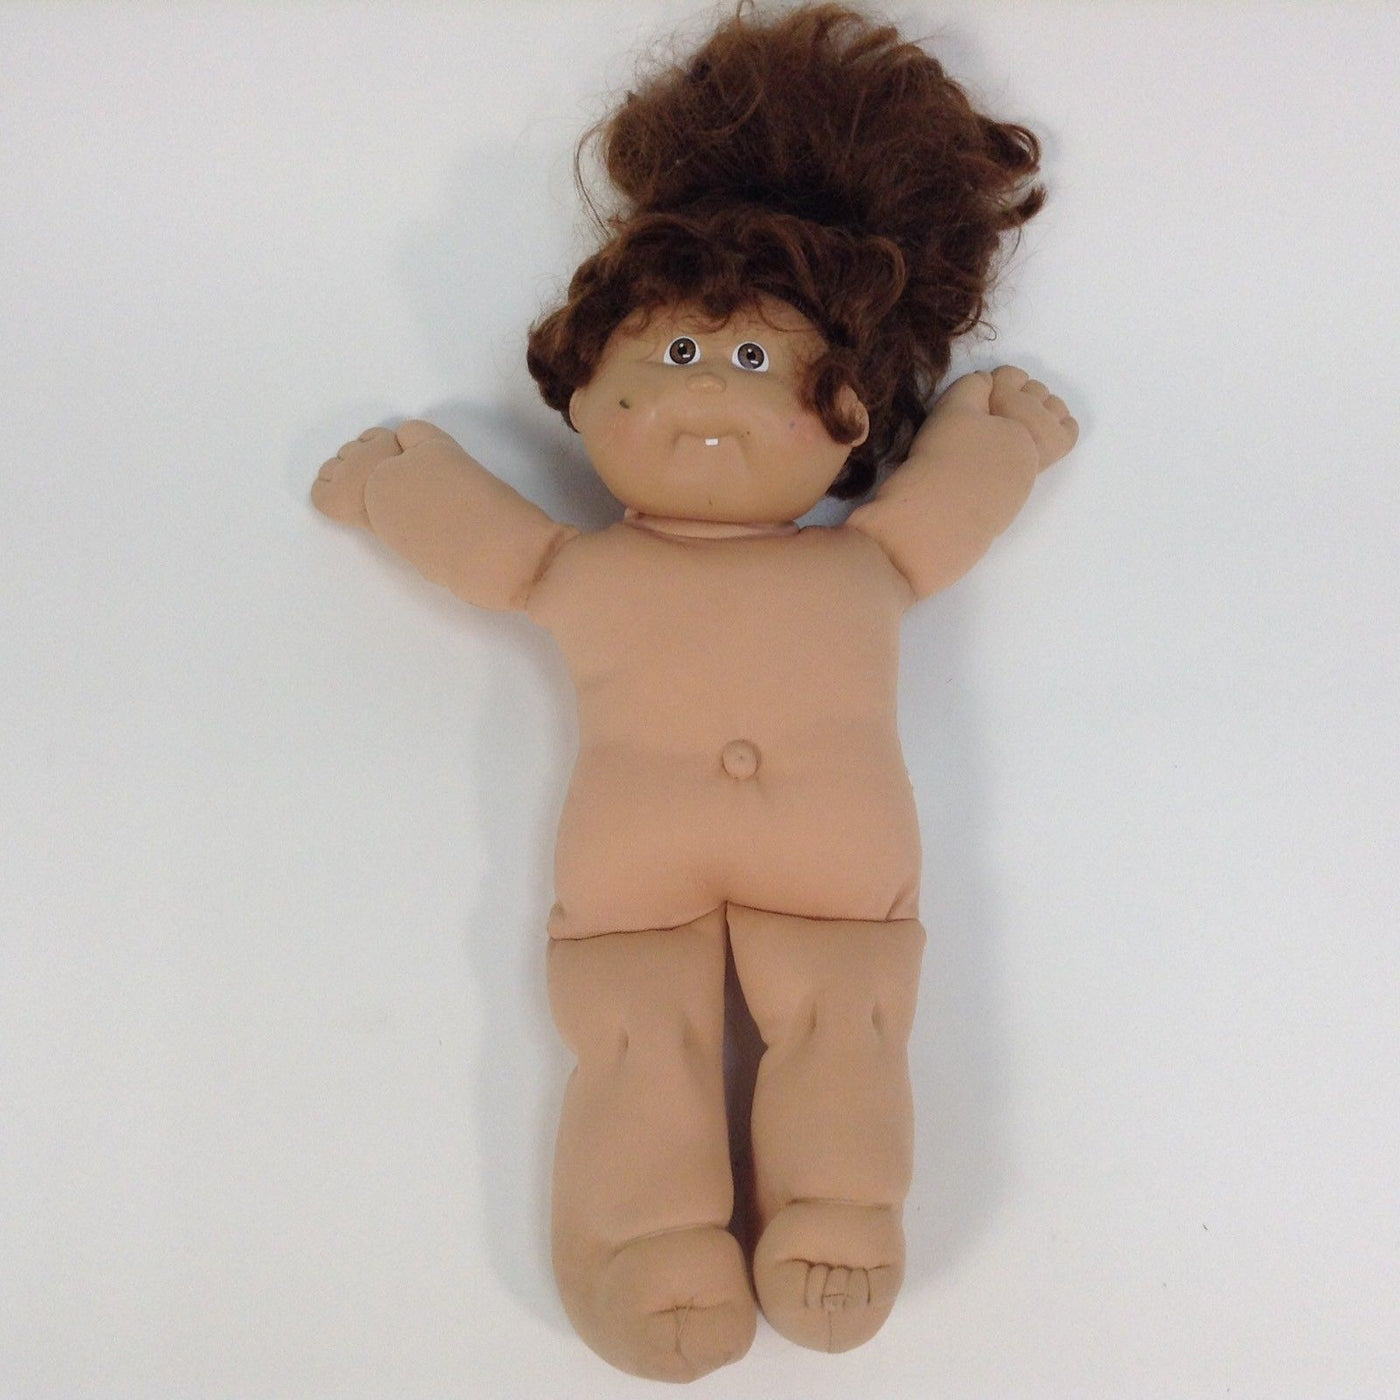 brown hair cabbage patch kid